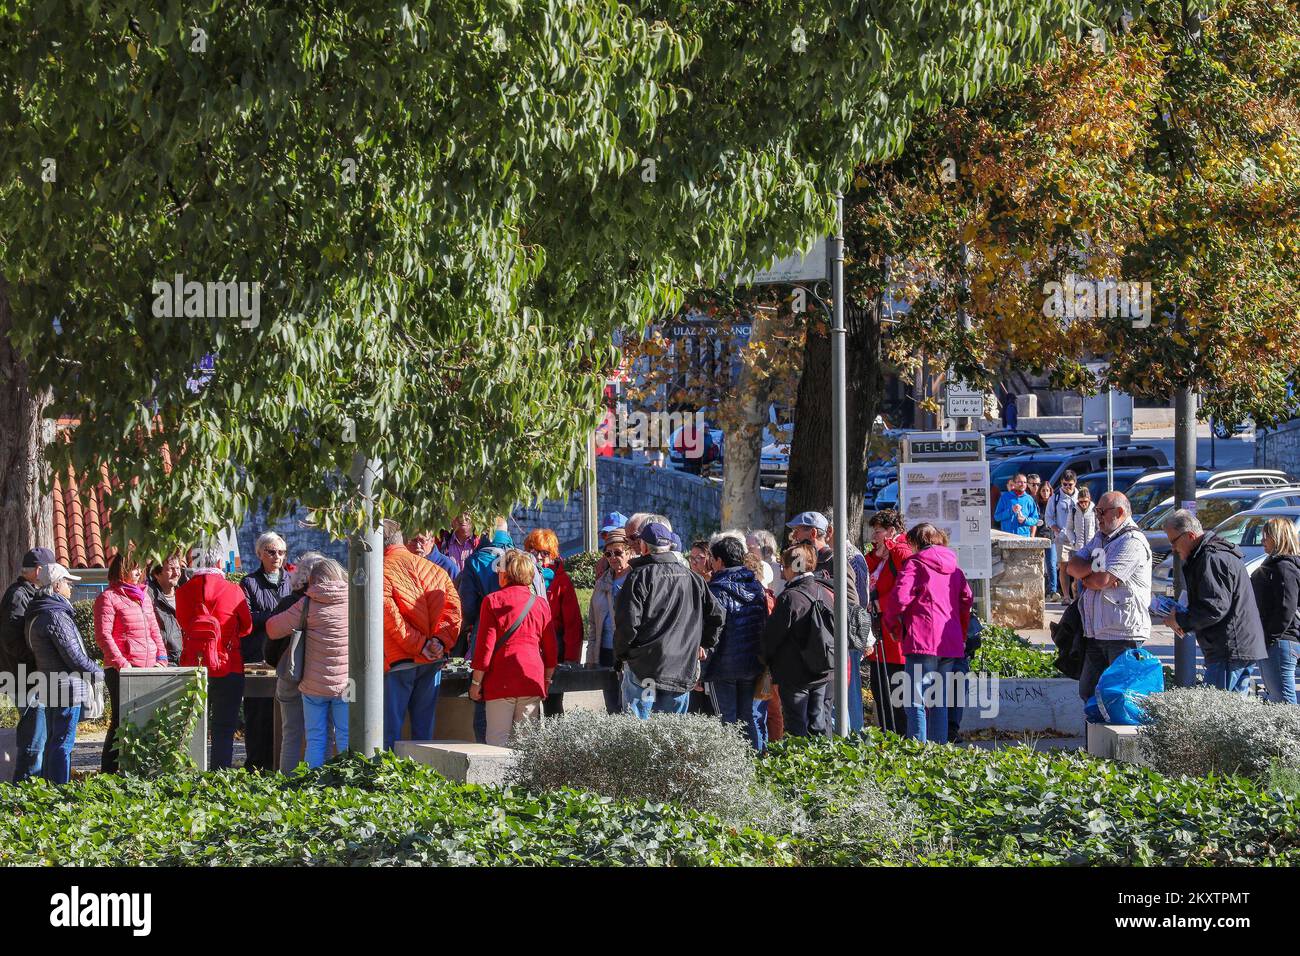 Tourists visited the city center ,in Pula, Croatia, on october 24, 2021  Photo: Srecko Niketic/PIXSELL Stock Photo - Alamy